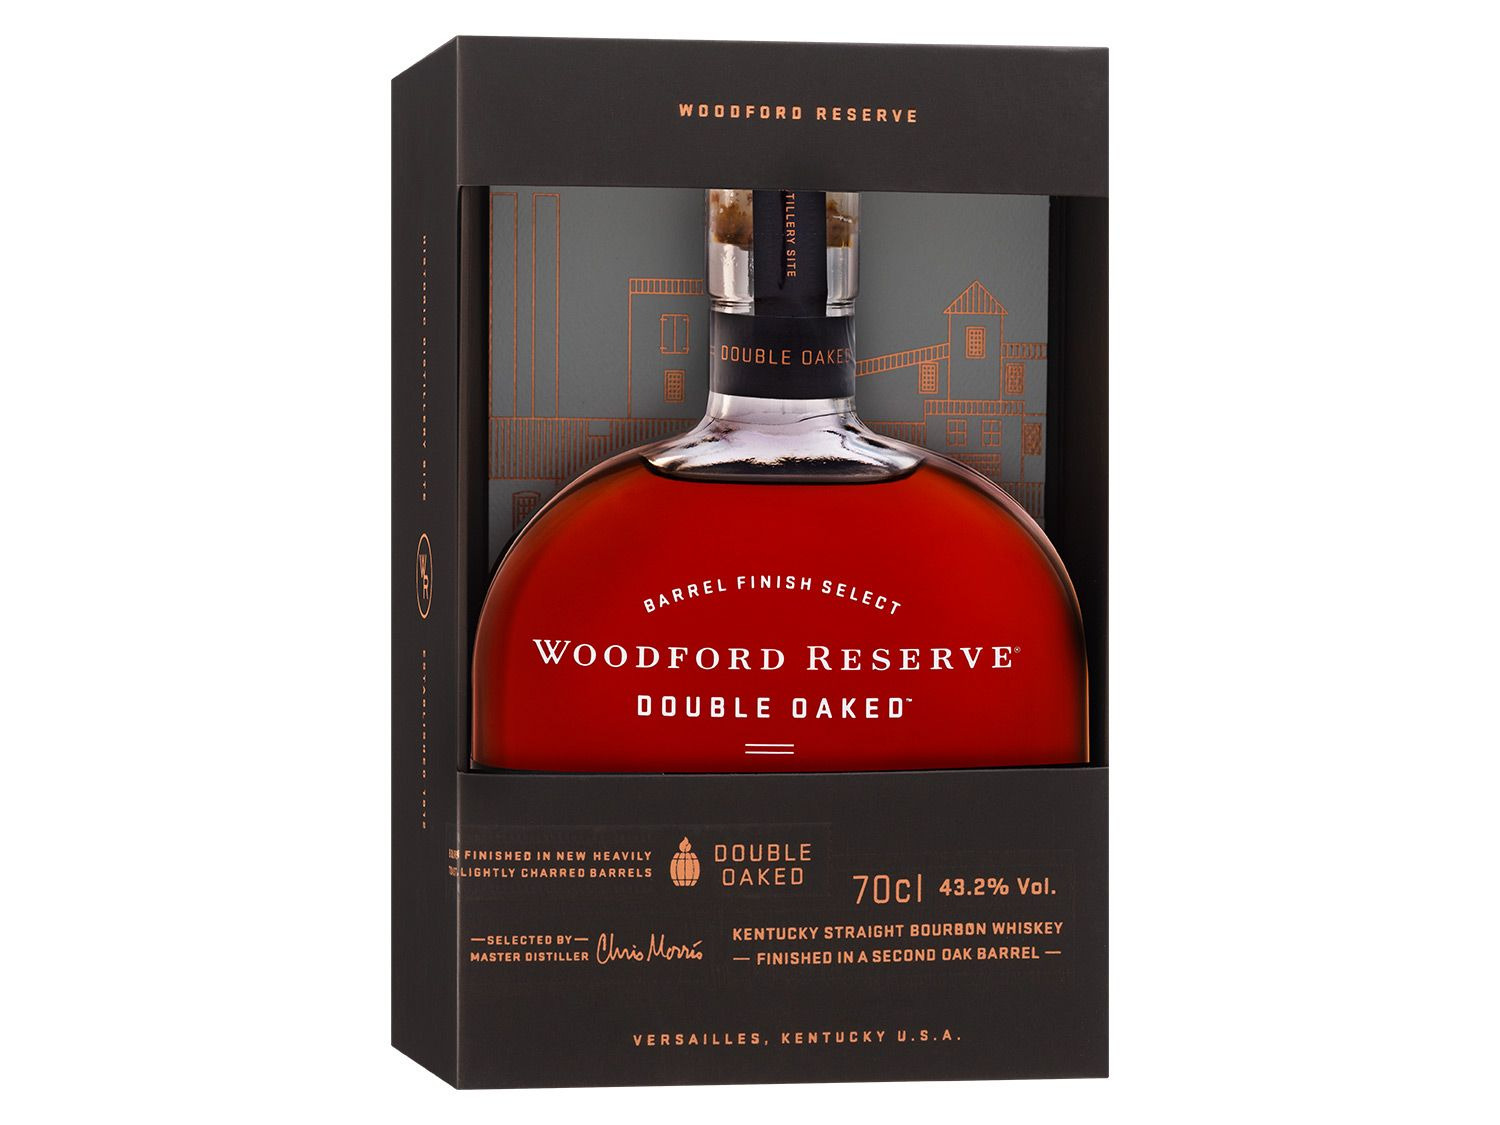 Woodford Reserve Double Oaked Kentucky Straight Bourbo…